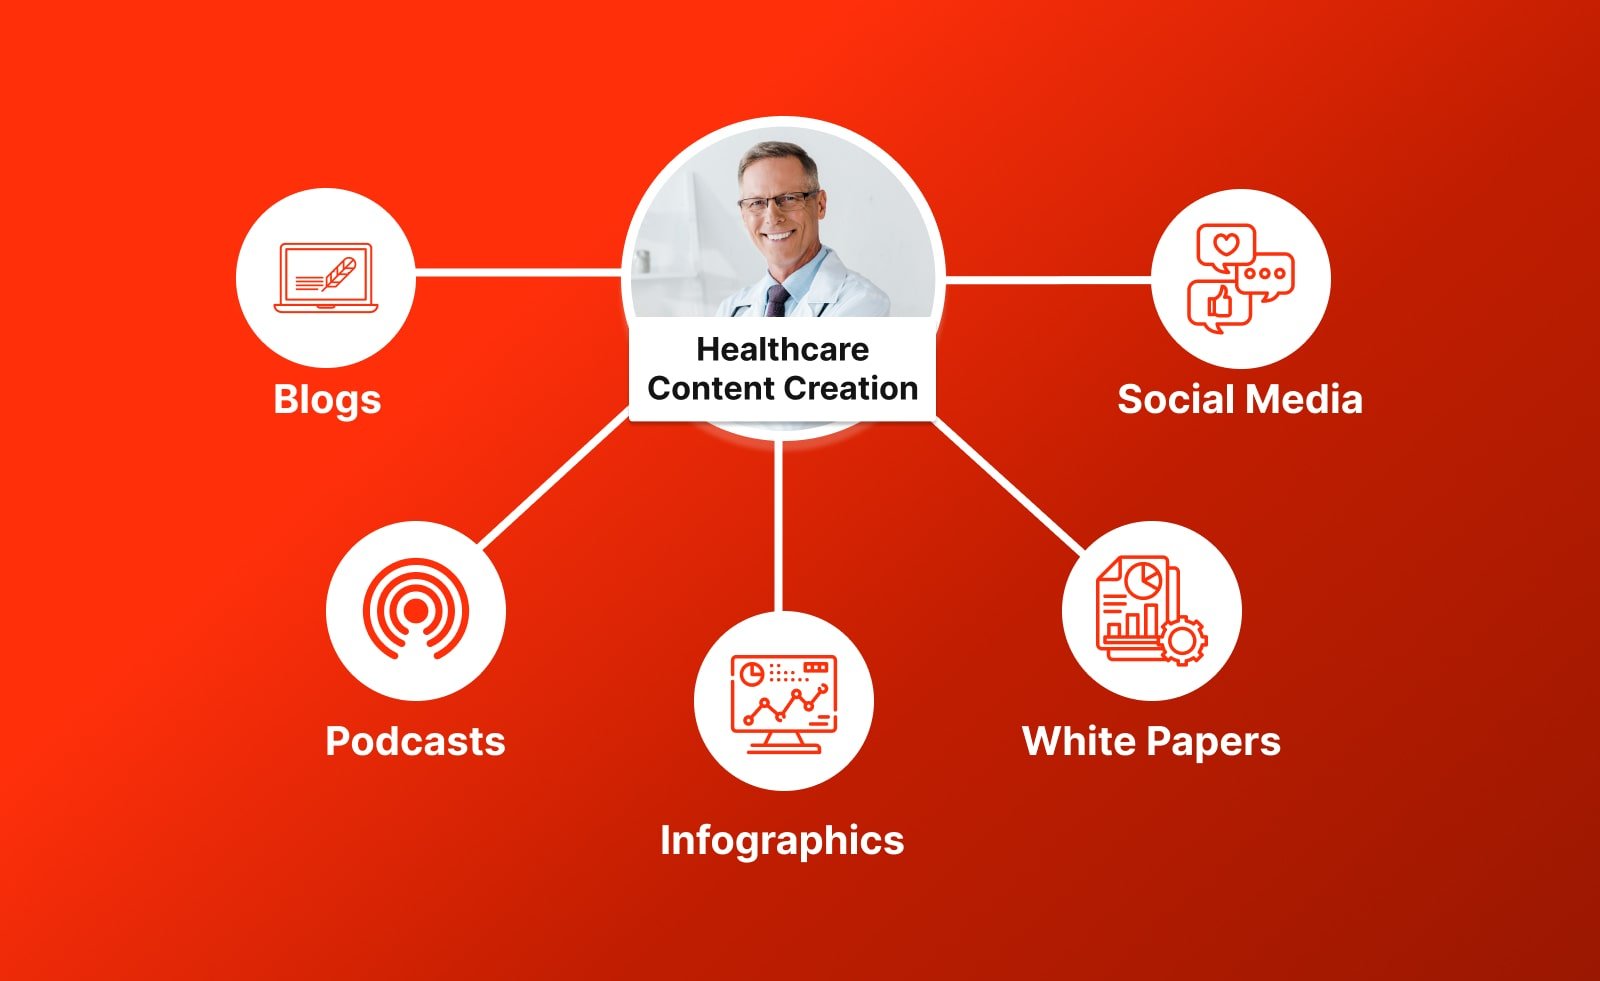 Healthcare Content creation diagram showing different types of content